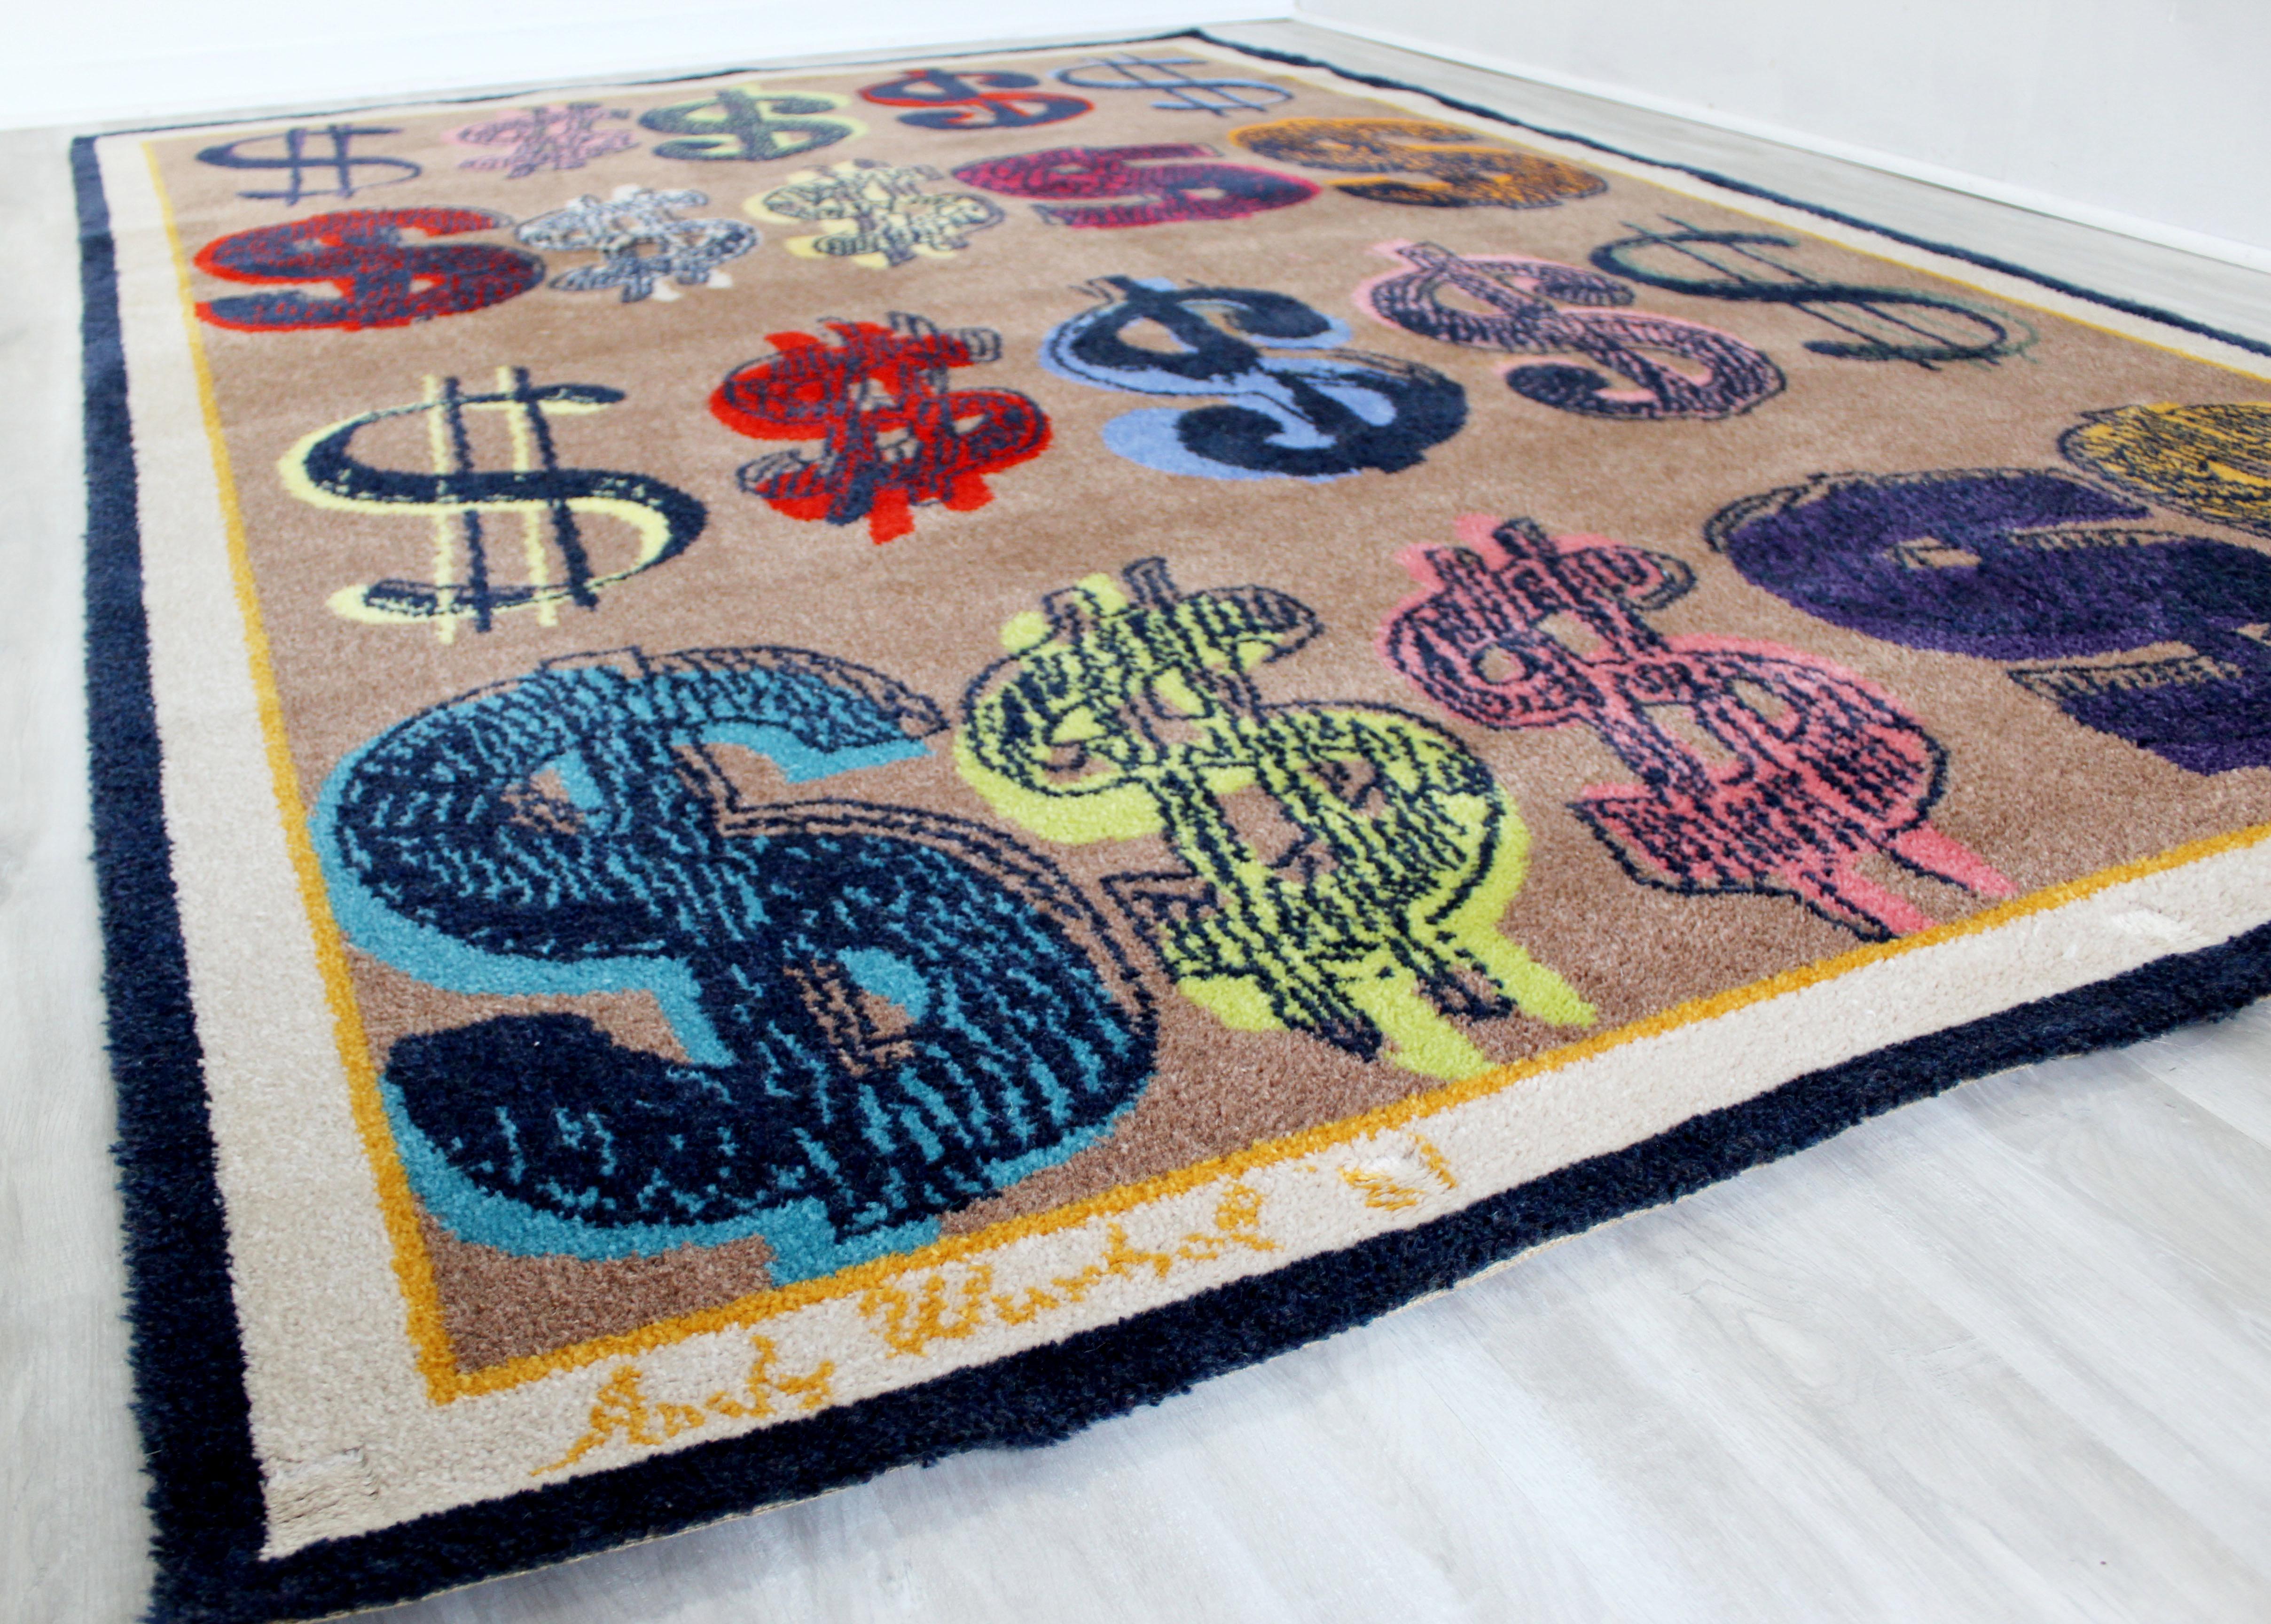 For your consideration is an incredible area rug or carpet, with a dollar sign design, signed by Andy Warhol, circa 1981. In excellent condition. The dimensions are 110